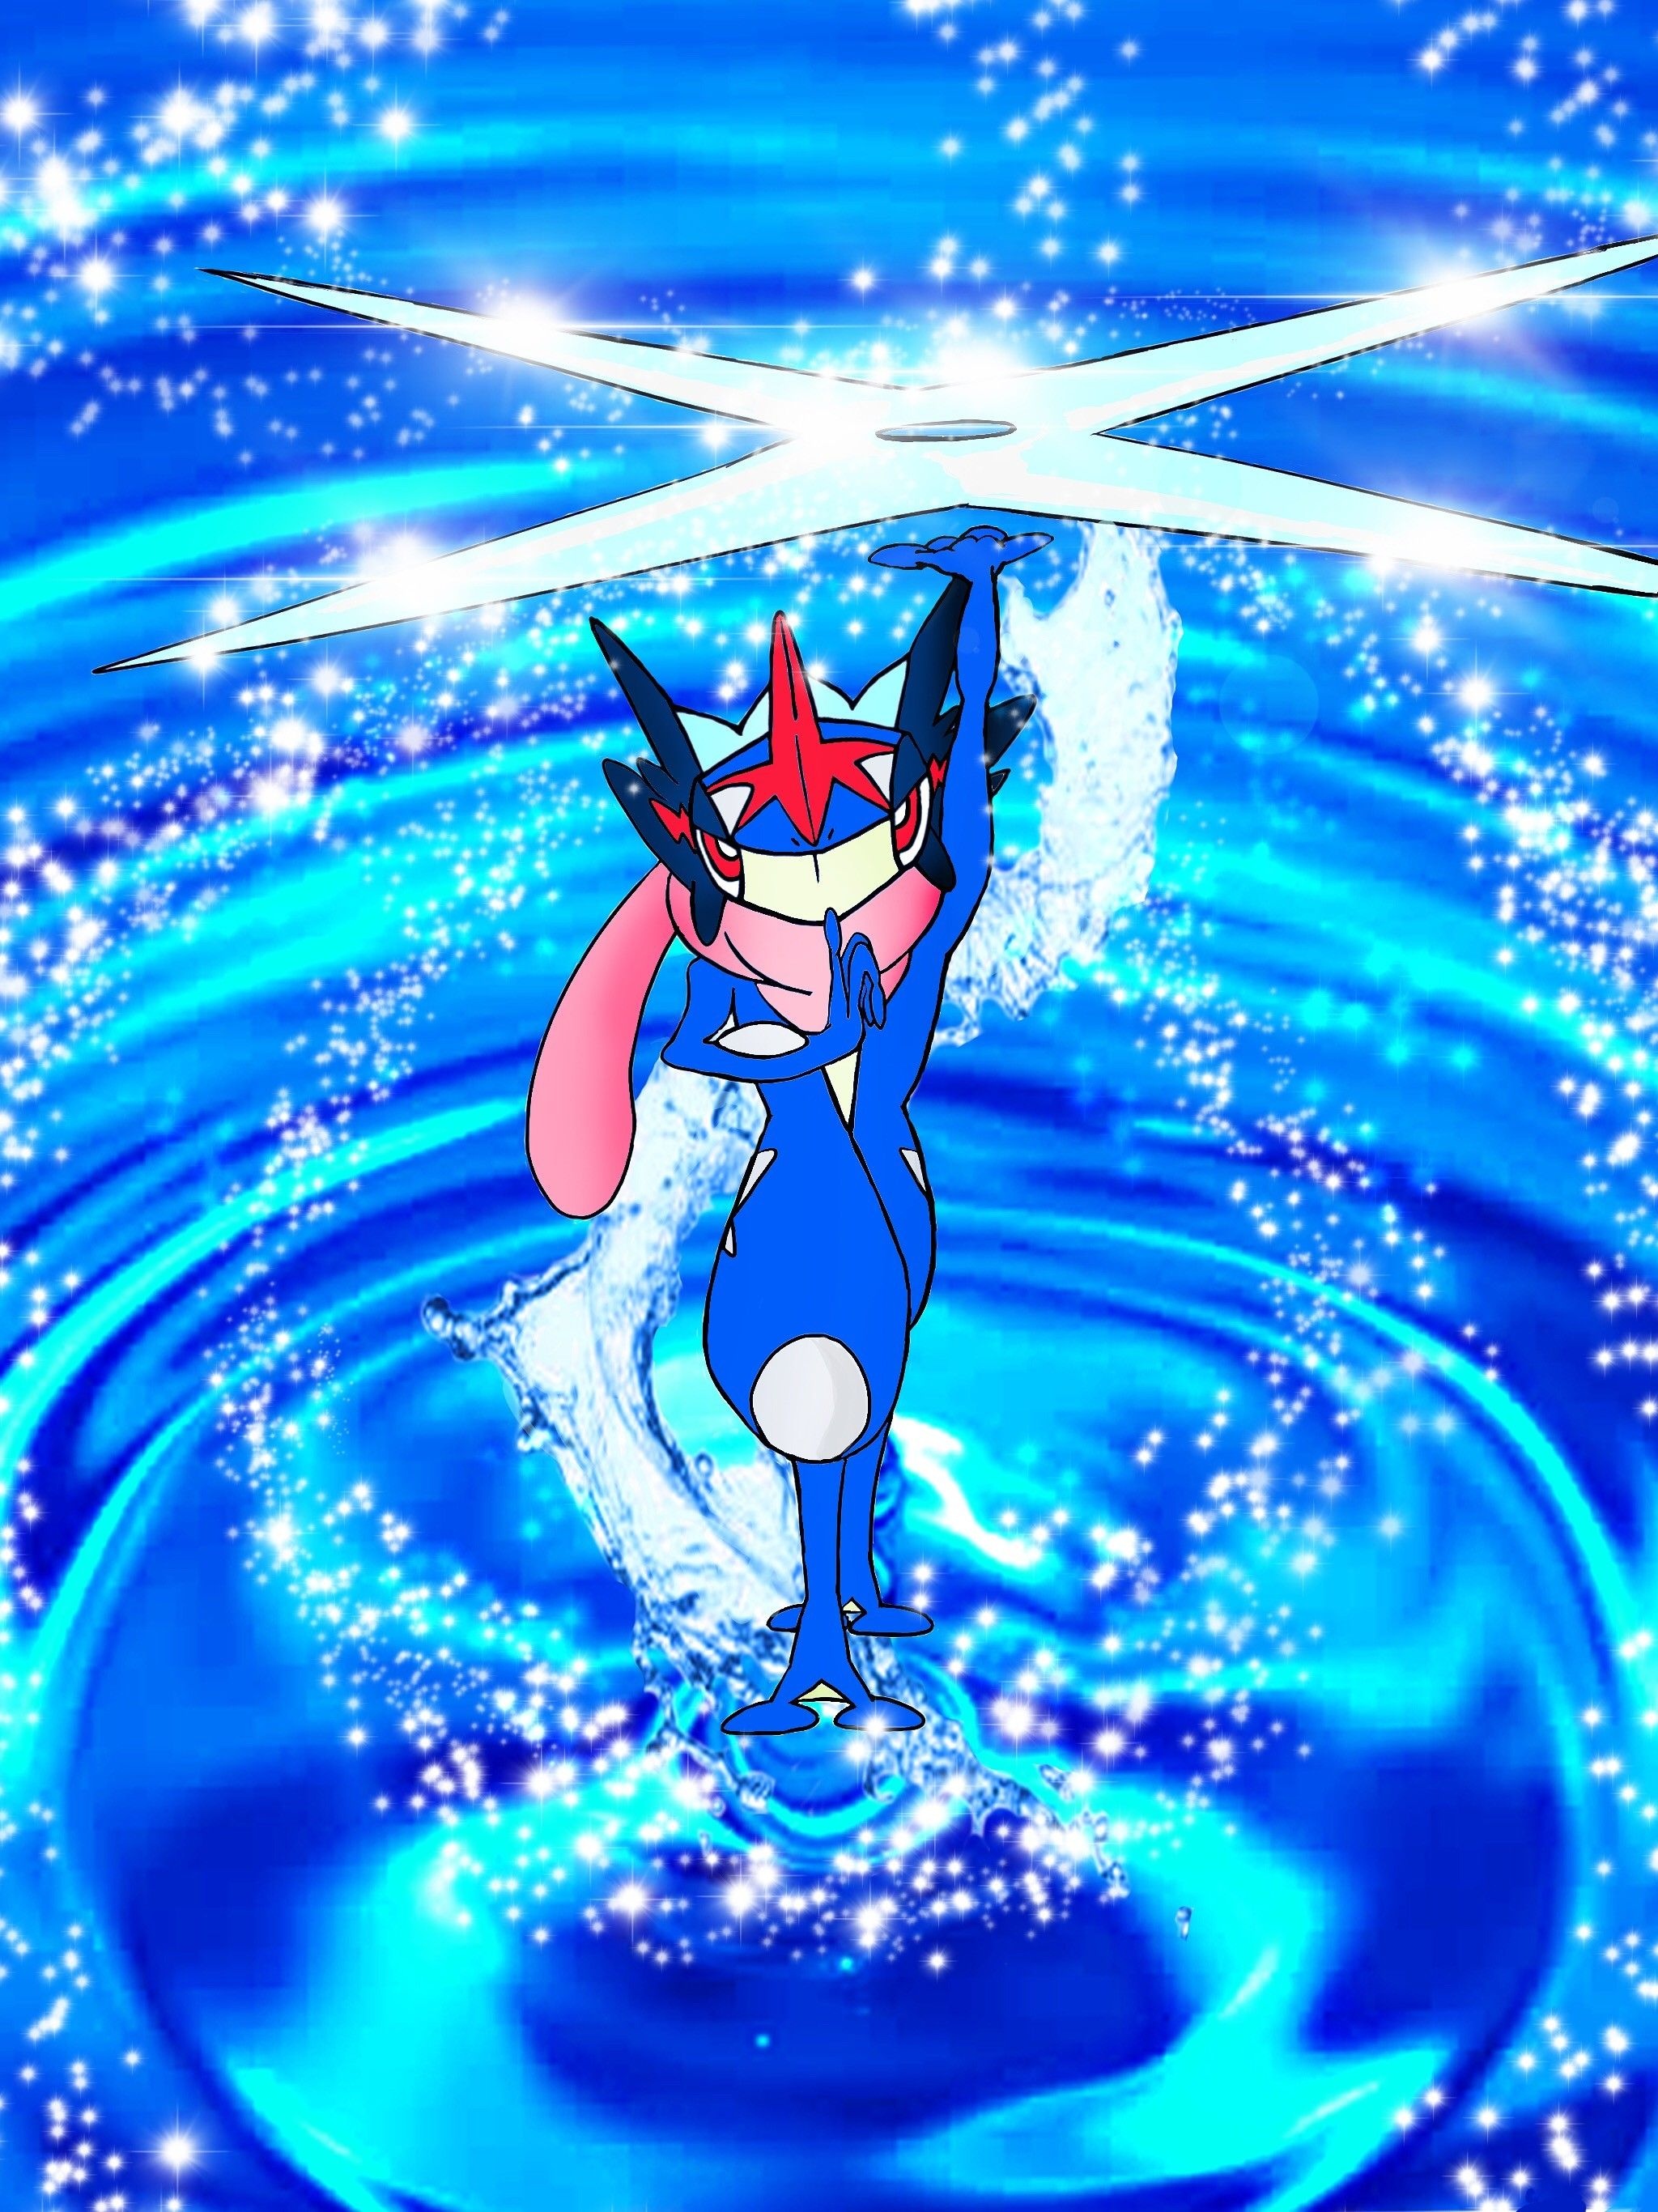 Ash and Greninja wallpapers, Top backgrounds, Gaming duo, Dynamic team, 2050x2740 HD Phone